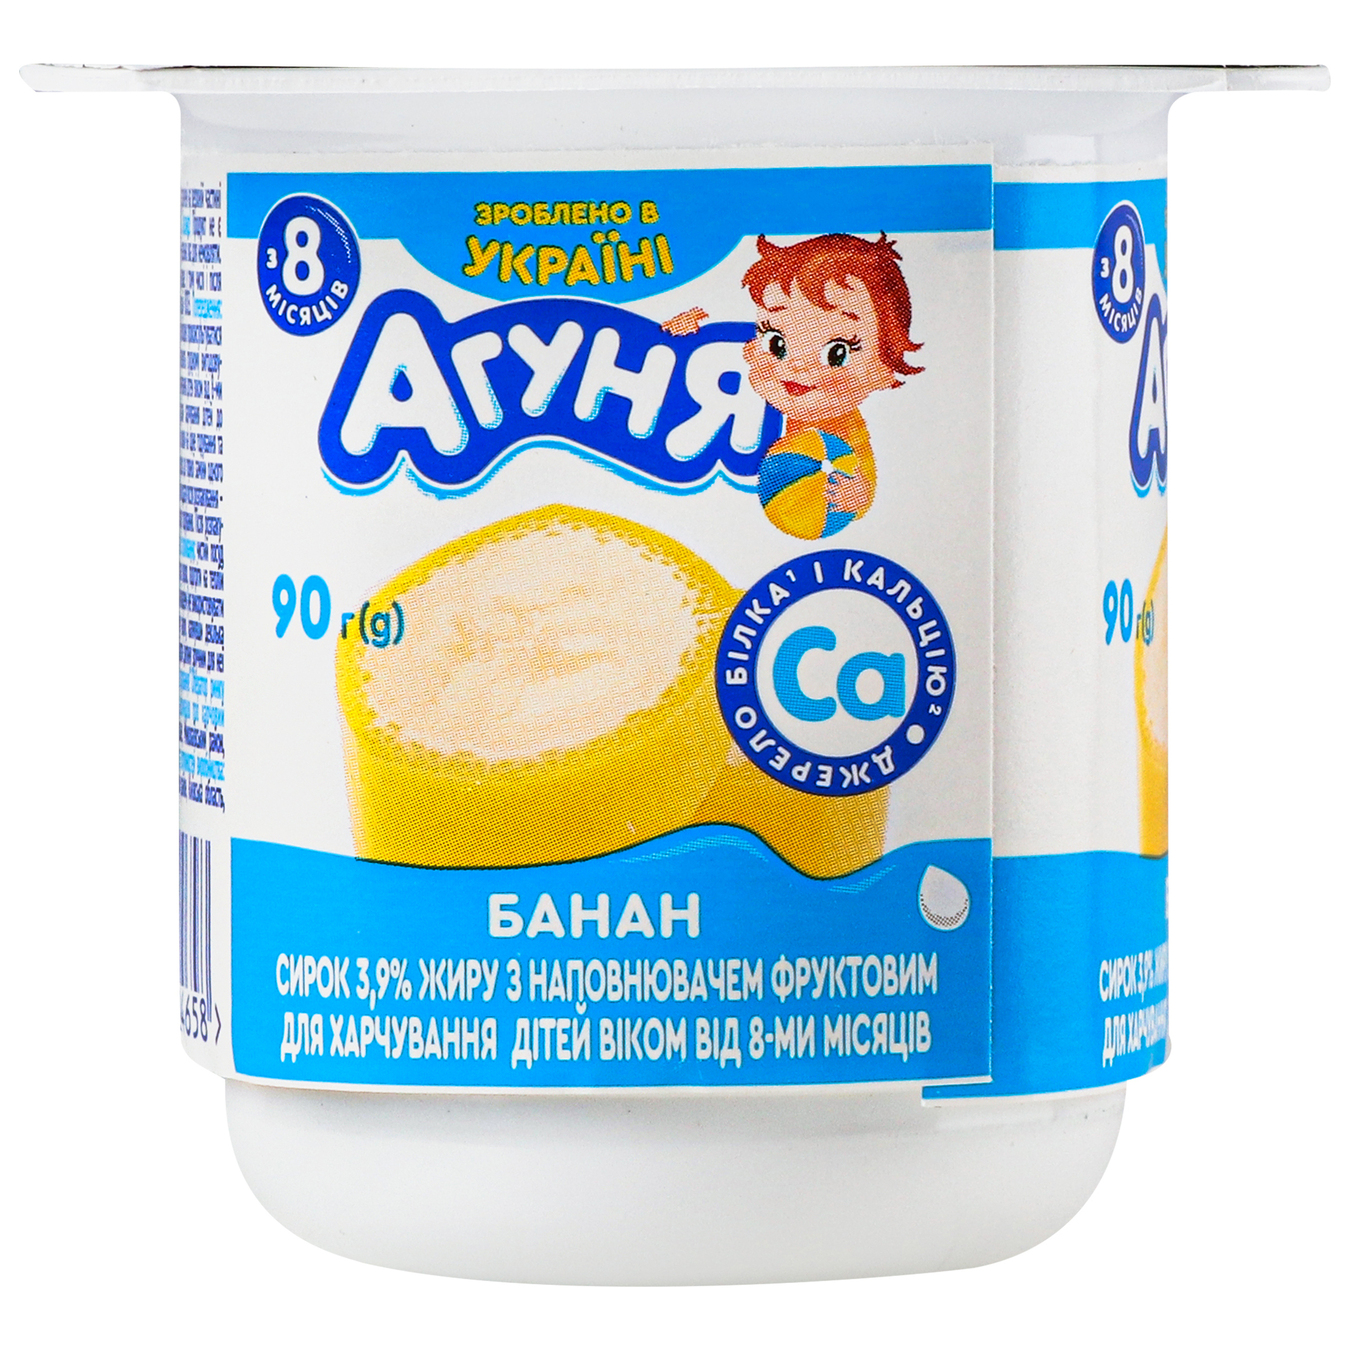 Agunya Banana cottage cheese for feeding children aged 8 months and over 3.9% 90g 4